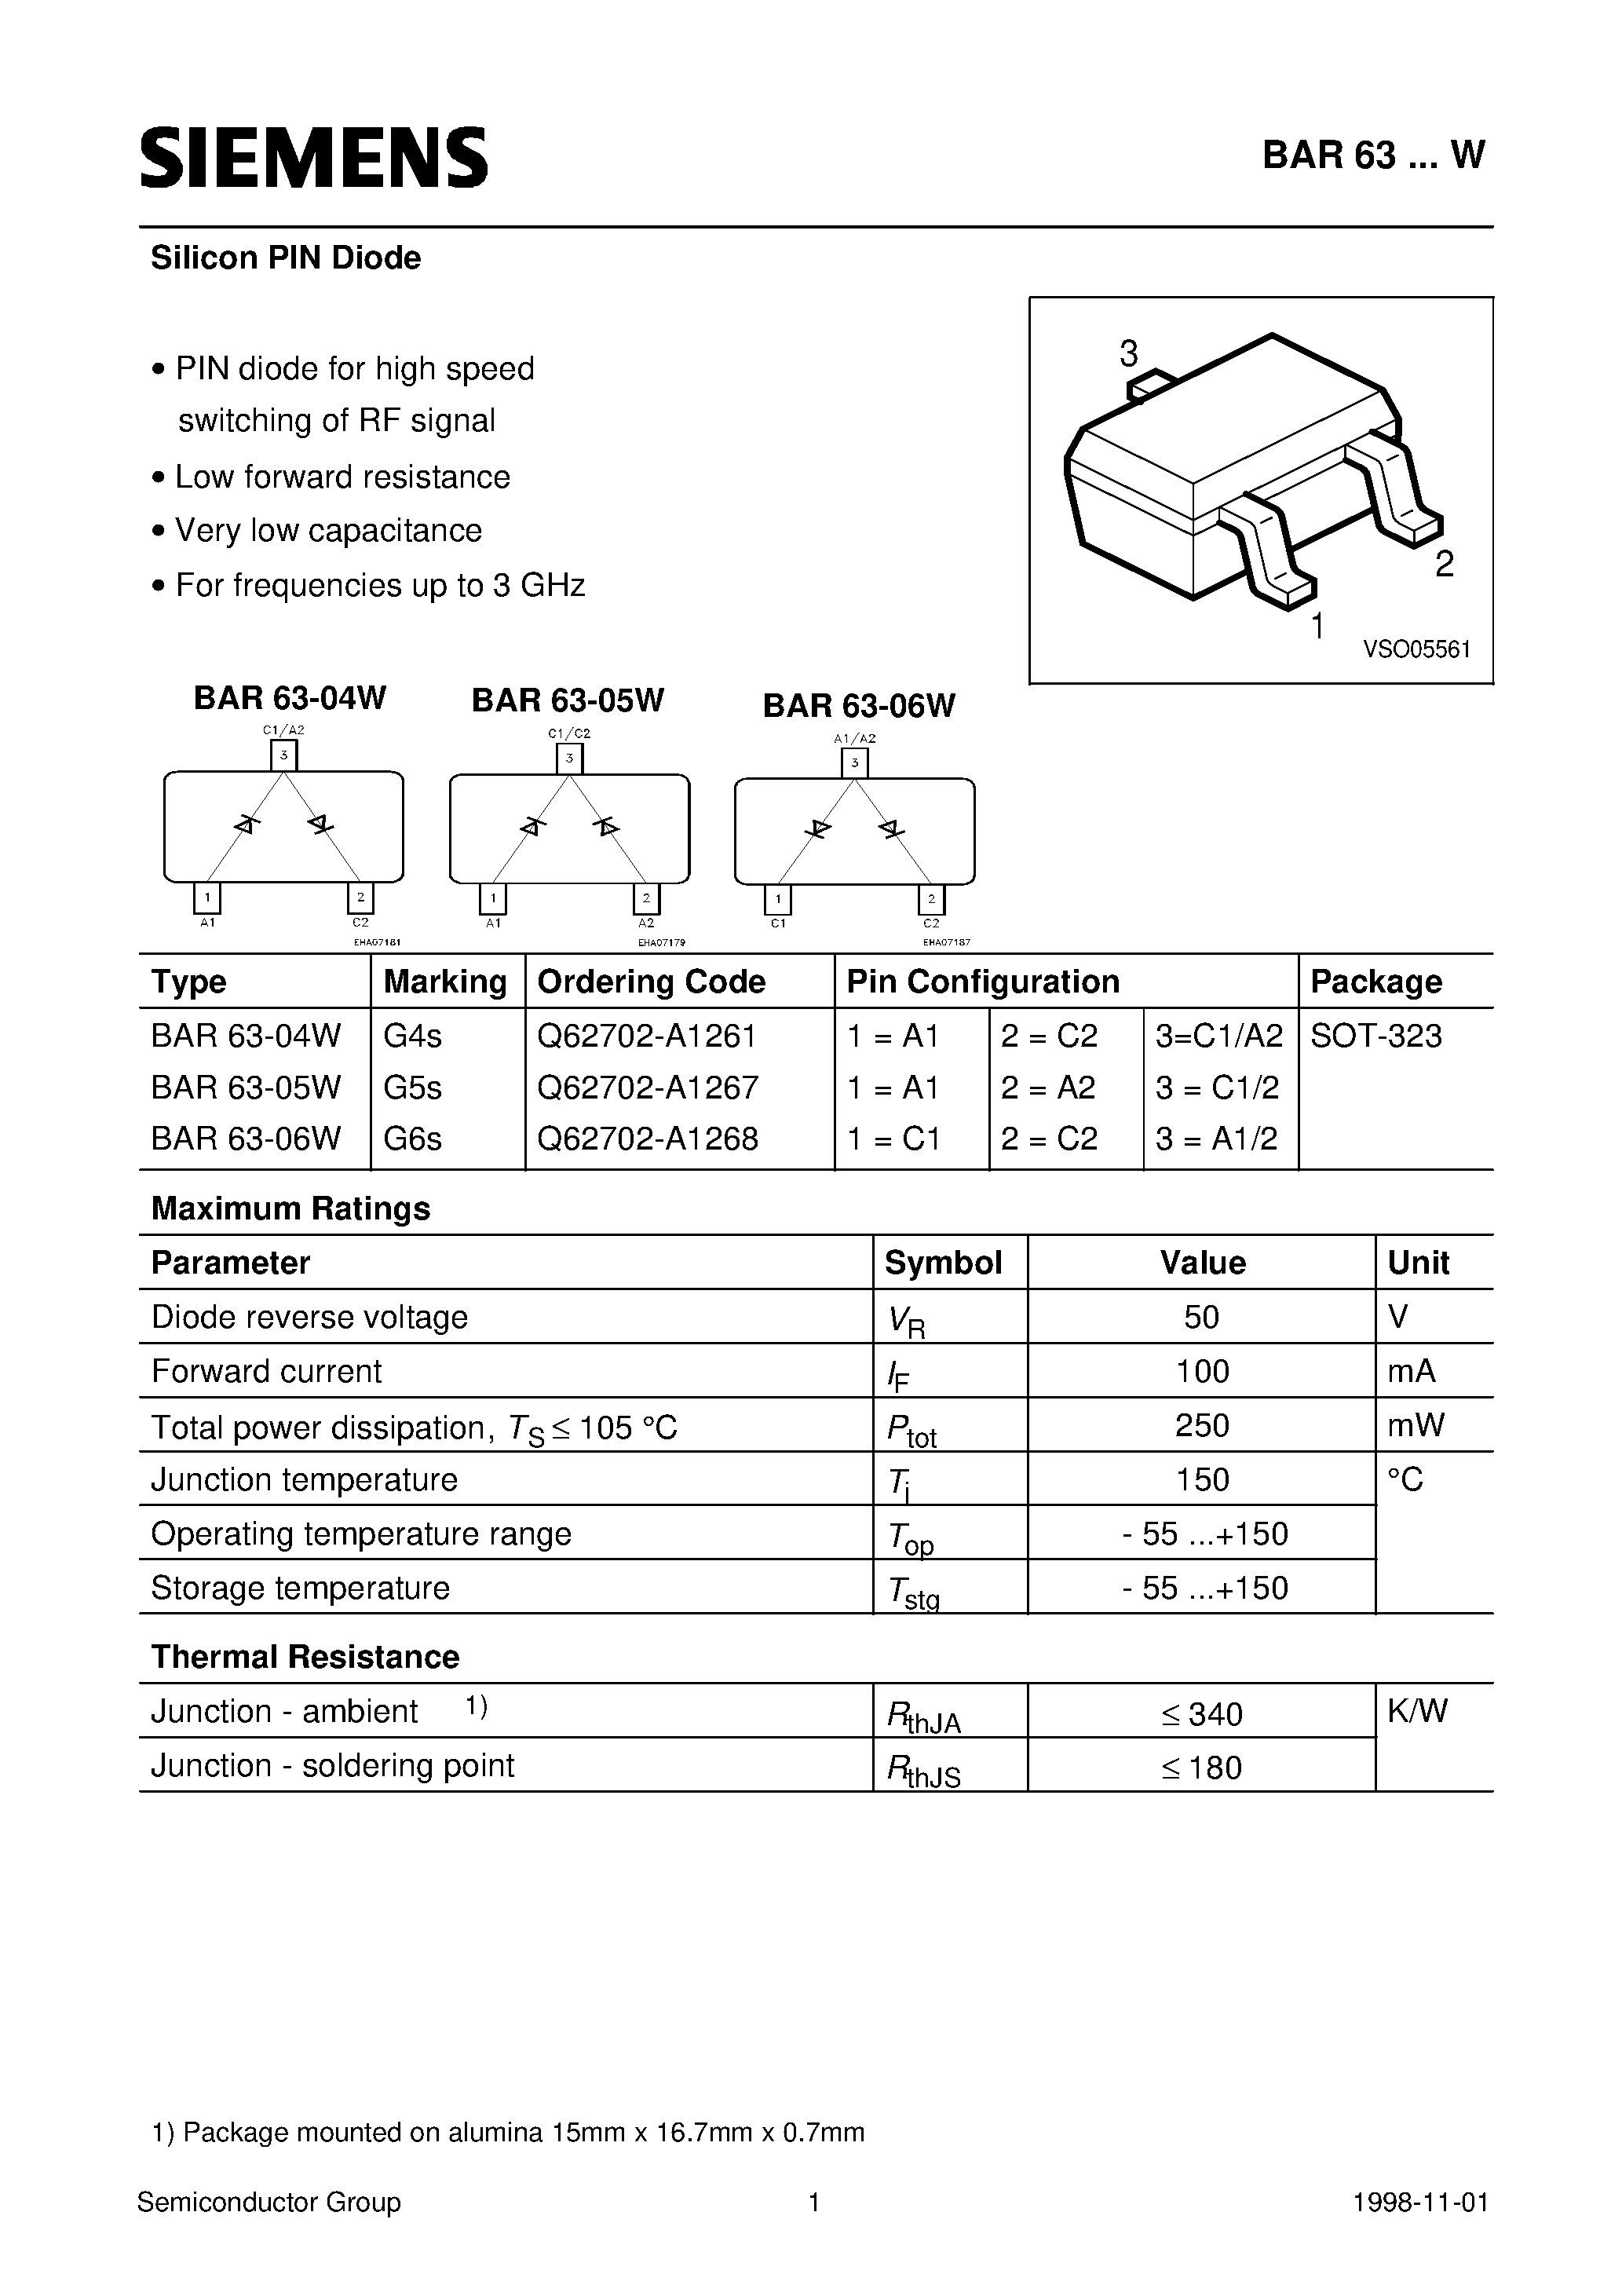 Datasheet BAR63-W - Silicon PIN Diode (PIN diode for high speed switching of RF signal Low forward resistance Very low capacitance For frequencies up to 3 GHz) page 1